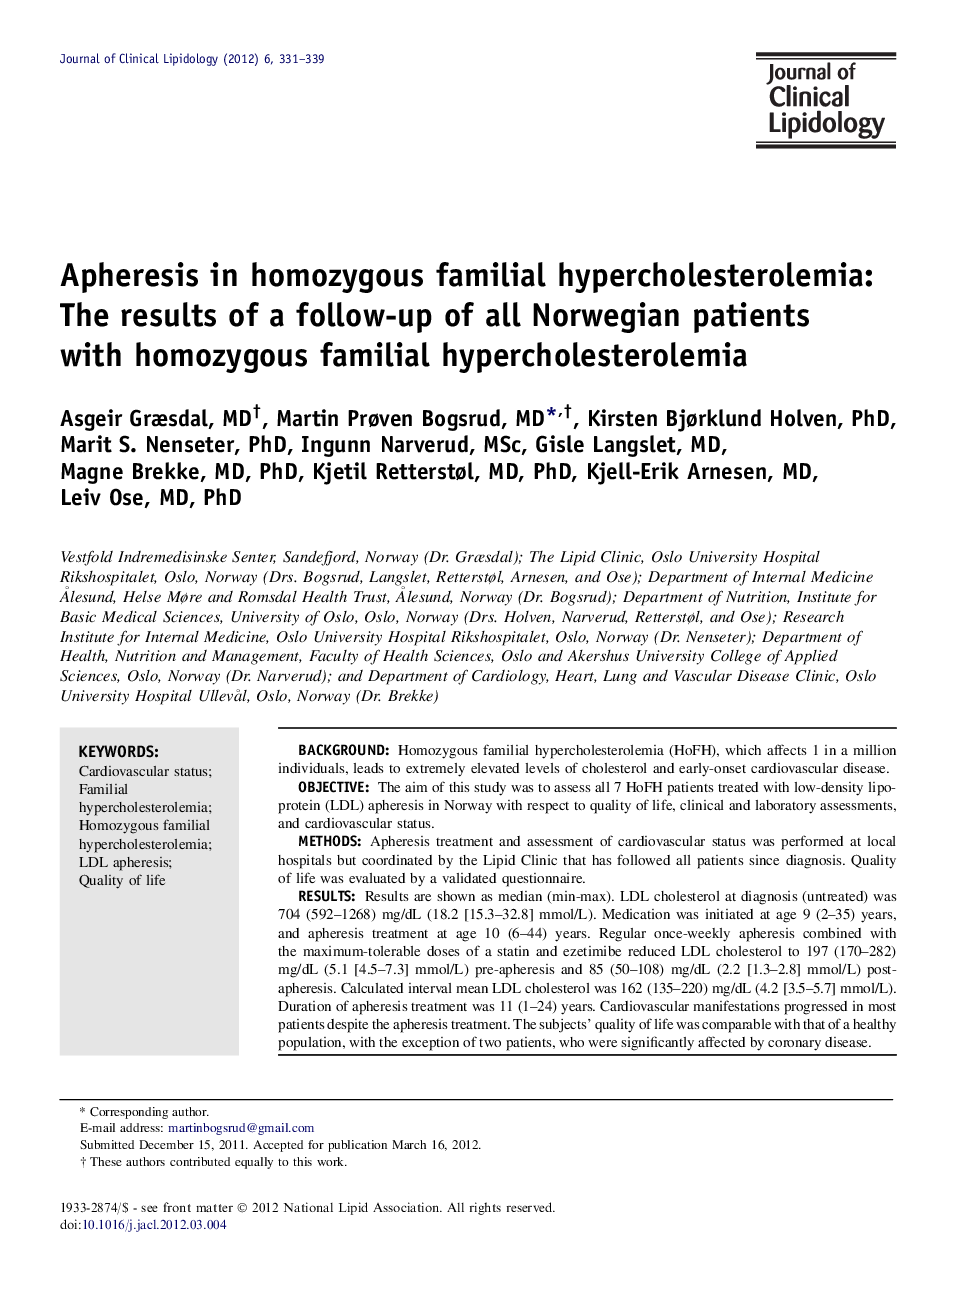 Apheresis in homozygous familial hypercholesterolemia: The results of a follow-up of all Norwegian patients with homozygous familial hypercholesterolemia